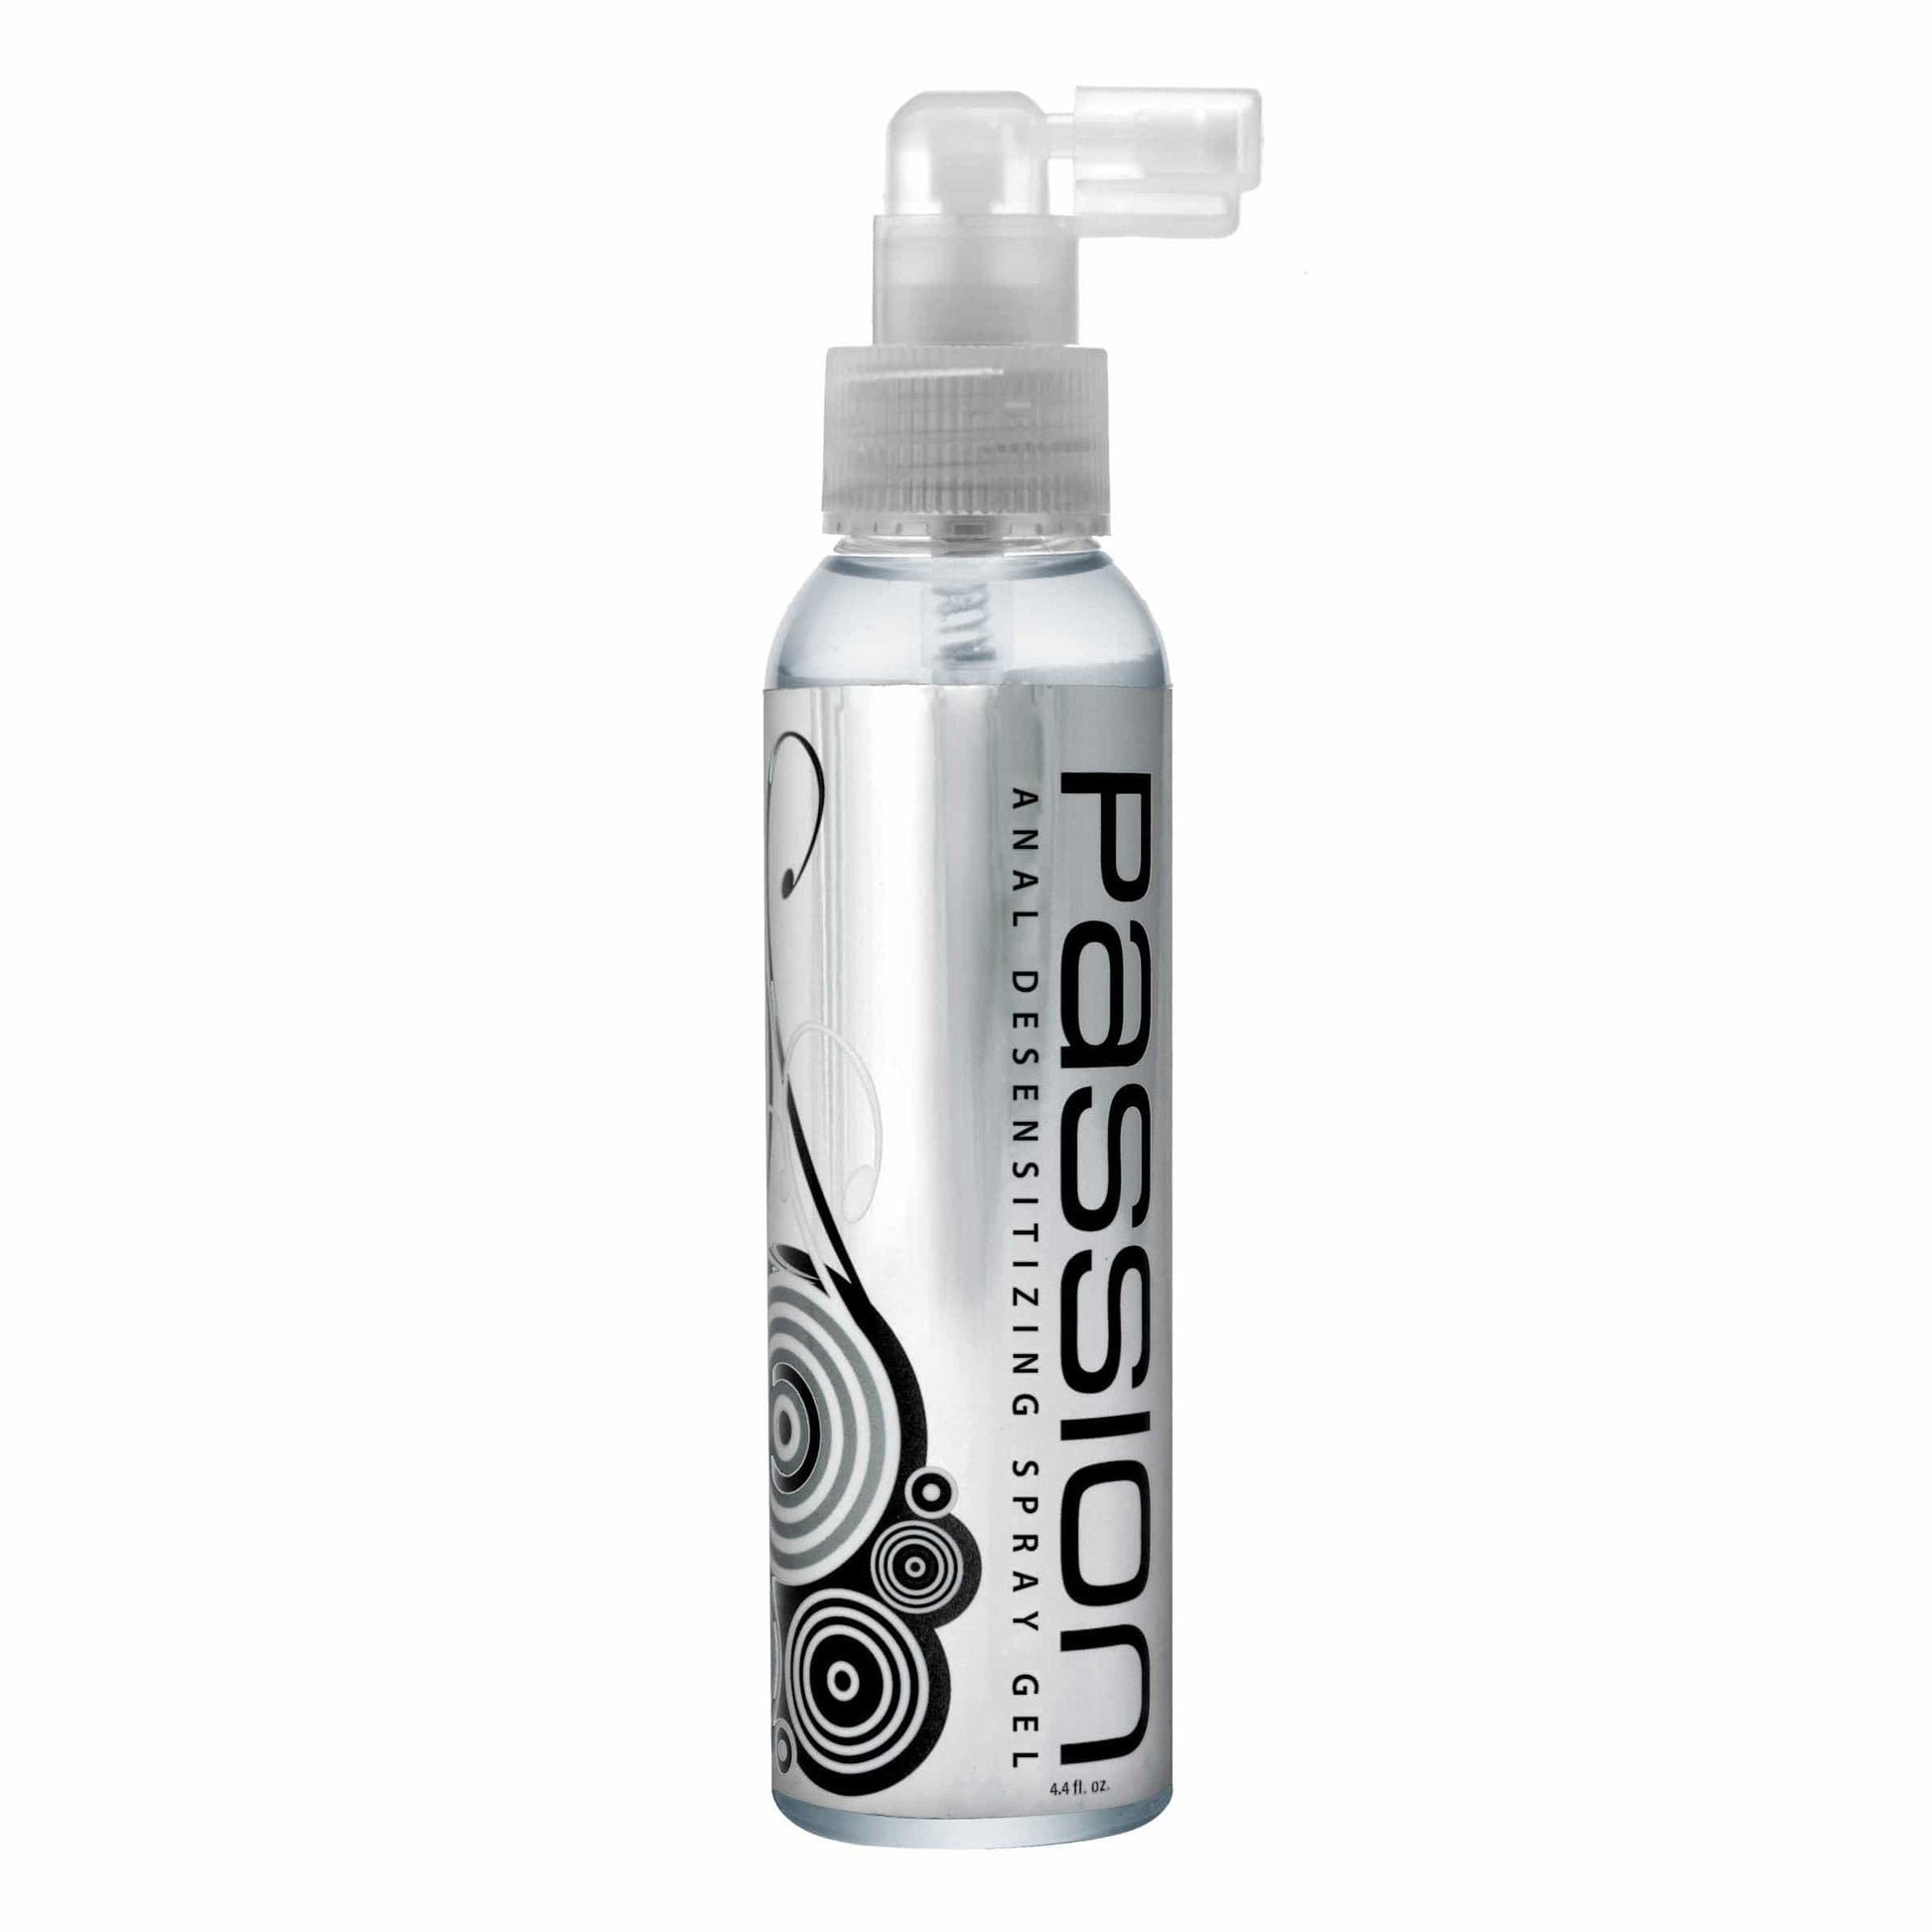 Passion Lubricants Numbing Spray 4.4 oz. Passion Extra Strength Anal Desensitizing Spray Gel at the Haus of Shag